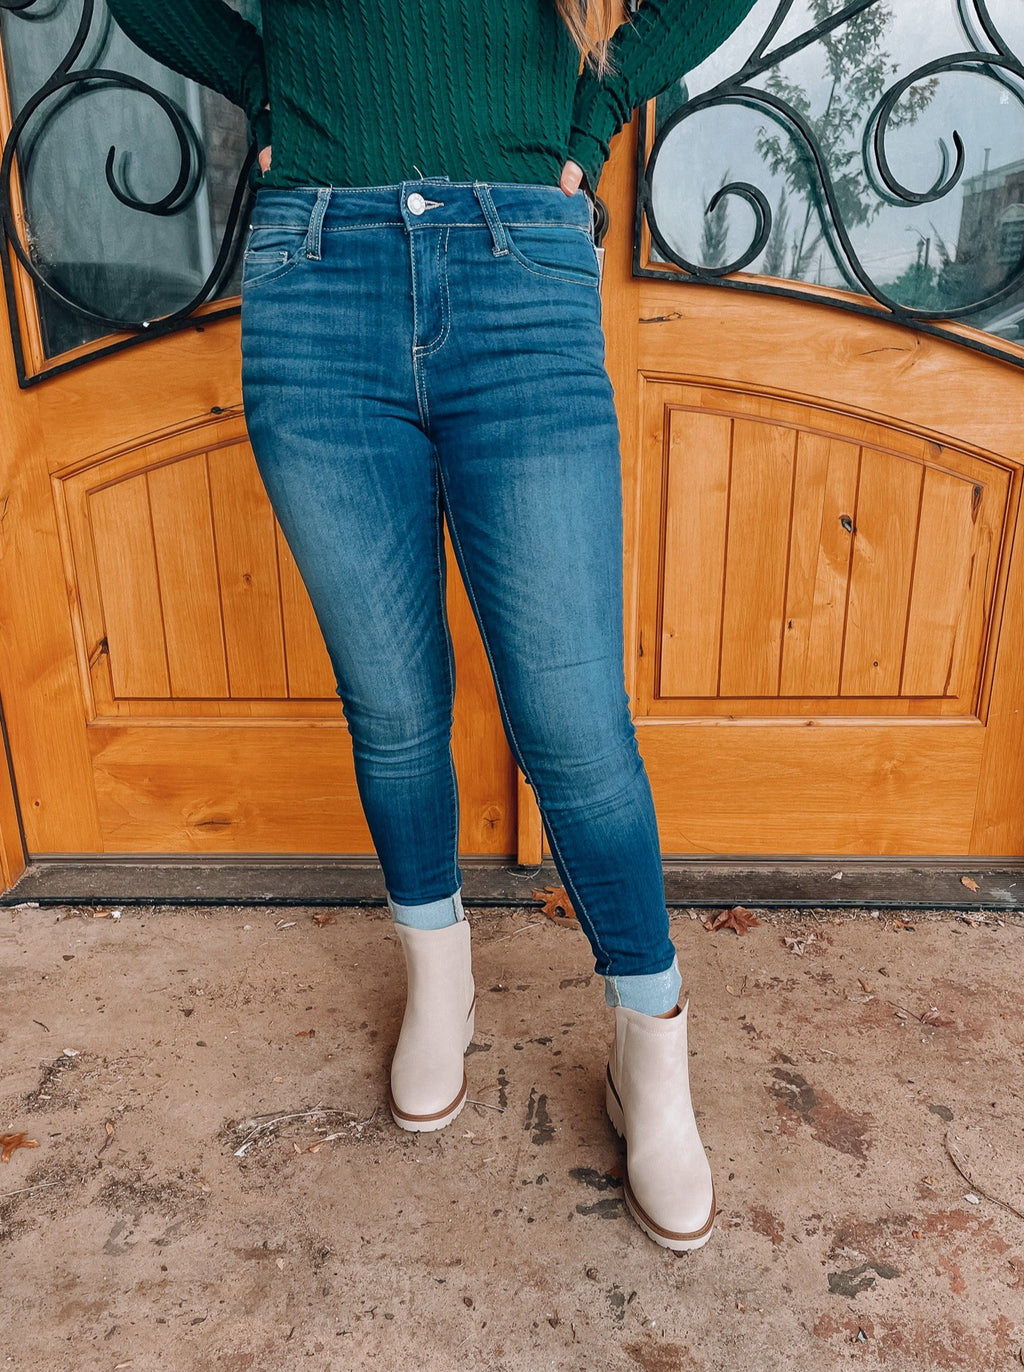 All Night Long Jeans (Sizes 1-22)